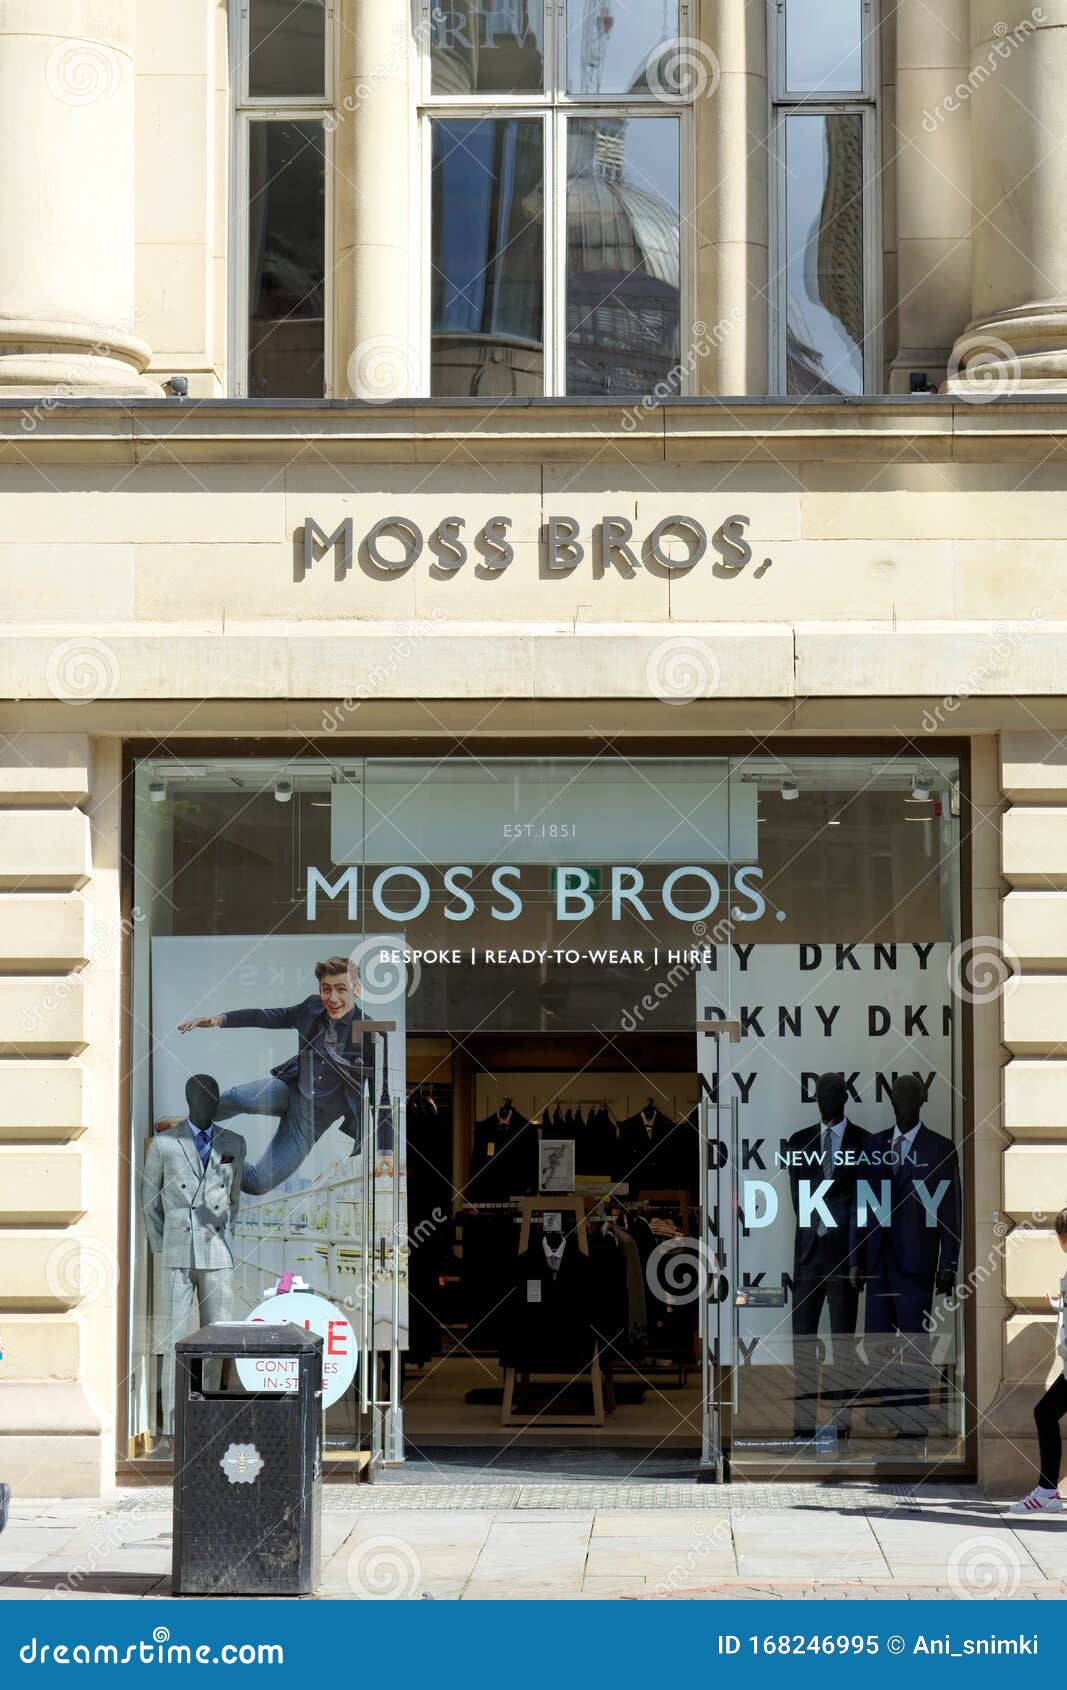 Moss Bros Clothing Store in the City Center of Manchester, England  Editorial Image - Image of formal, business: 168246995